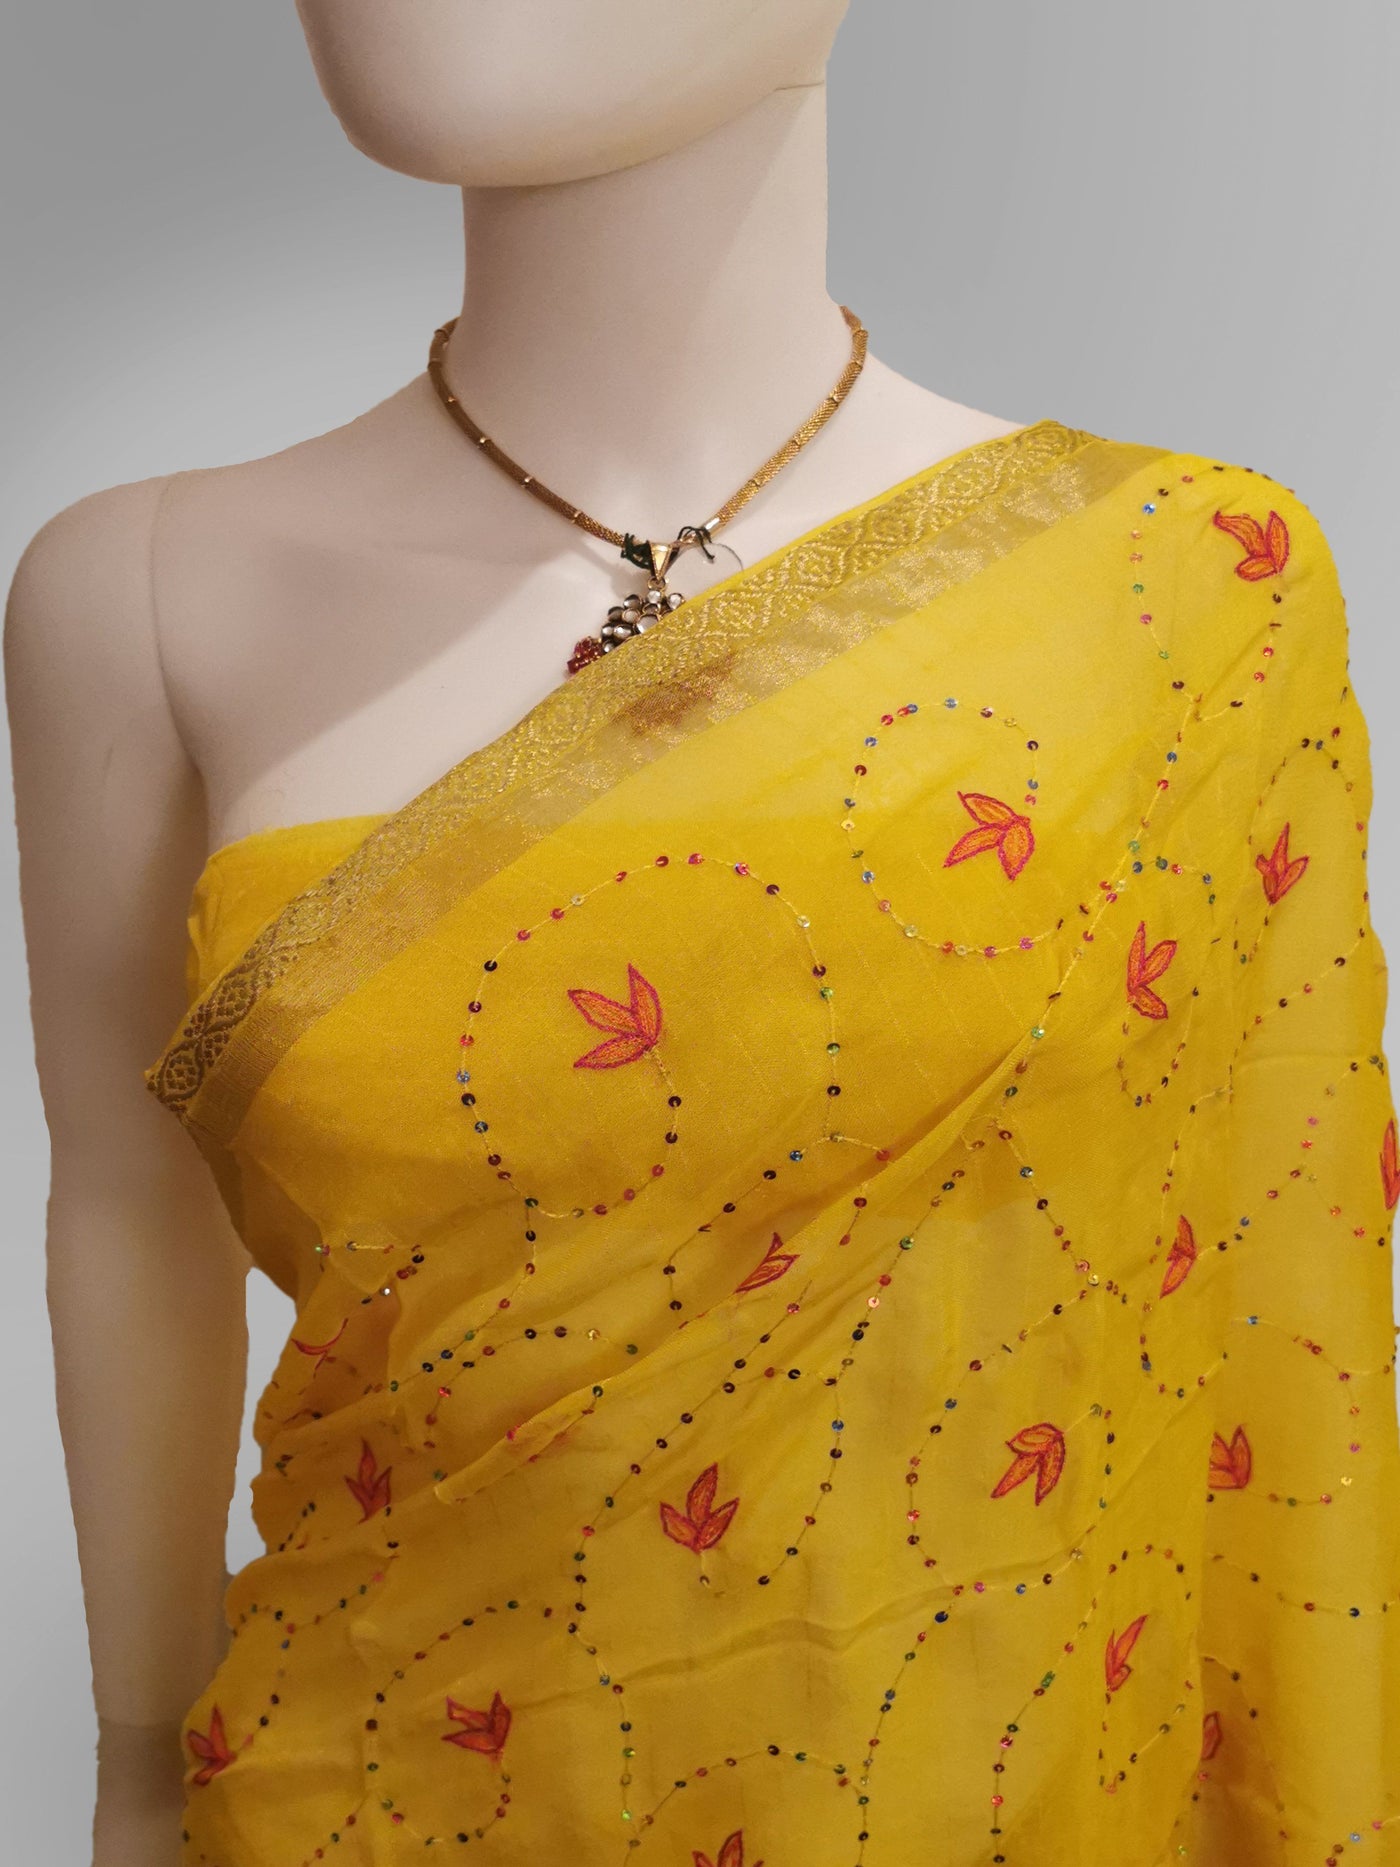 Saree in Yellow With Accent Pink Floral Design - Indian Clothing in Denver, CO, Aurora, CO, Boulder, CO, Fort Collins, CO, Colorado Springs, CO, Parker, CO, Highlands Ranch, CO, Cherry Creek, CO, Centennial, CO, and Longmont, CO. Nationwide shipping USA - India Fashion X